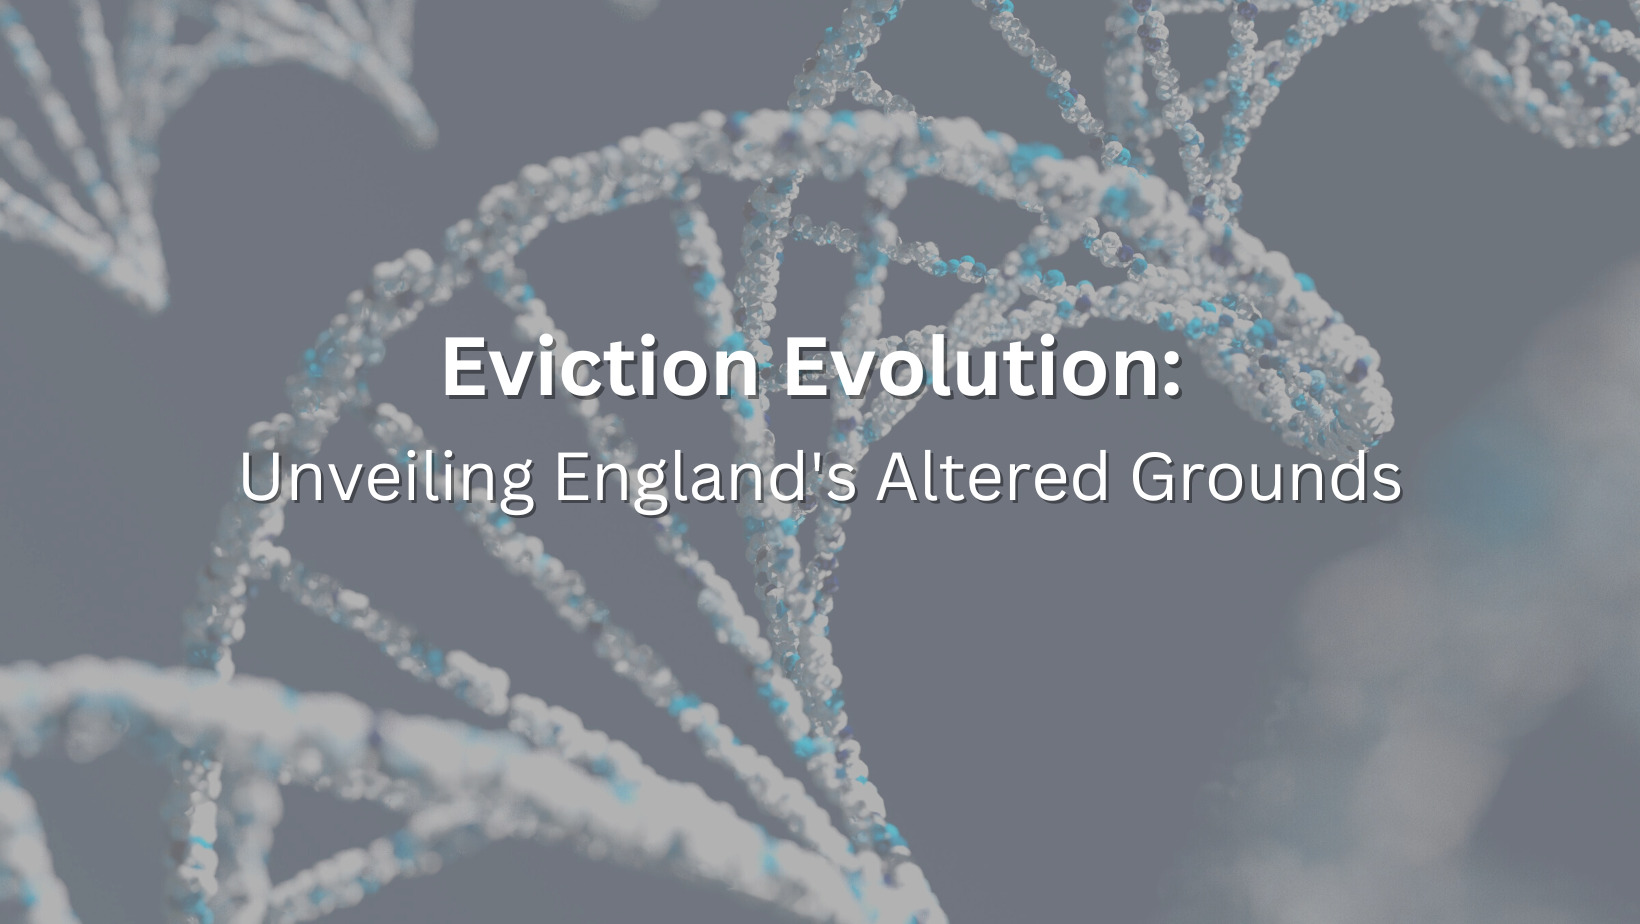 Eviction Evolution: Unveiling England’s Altered Grounds